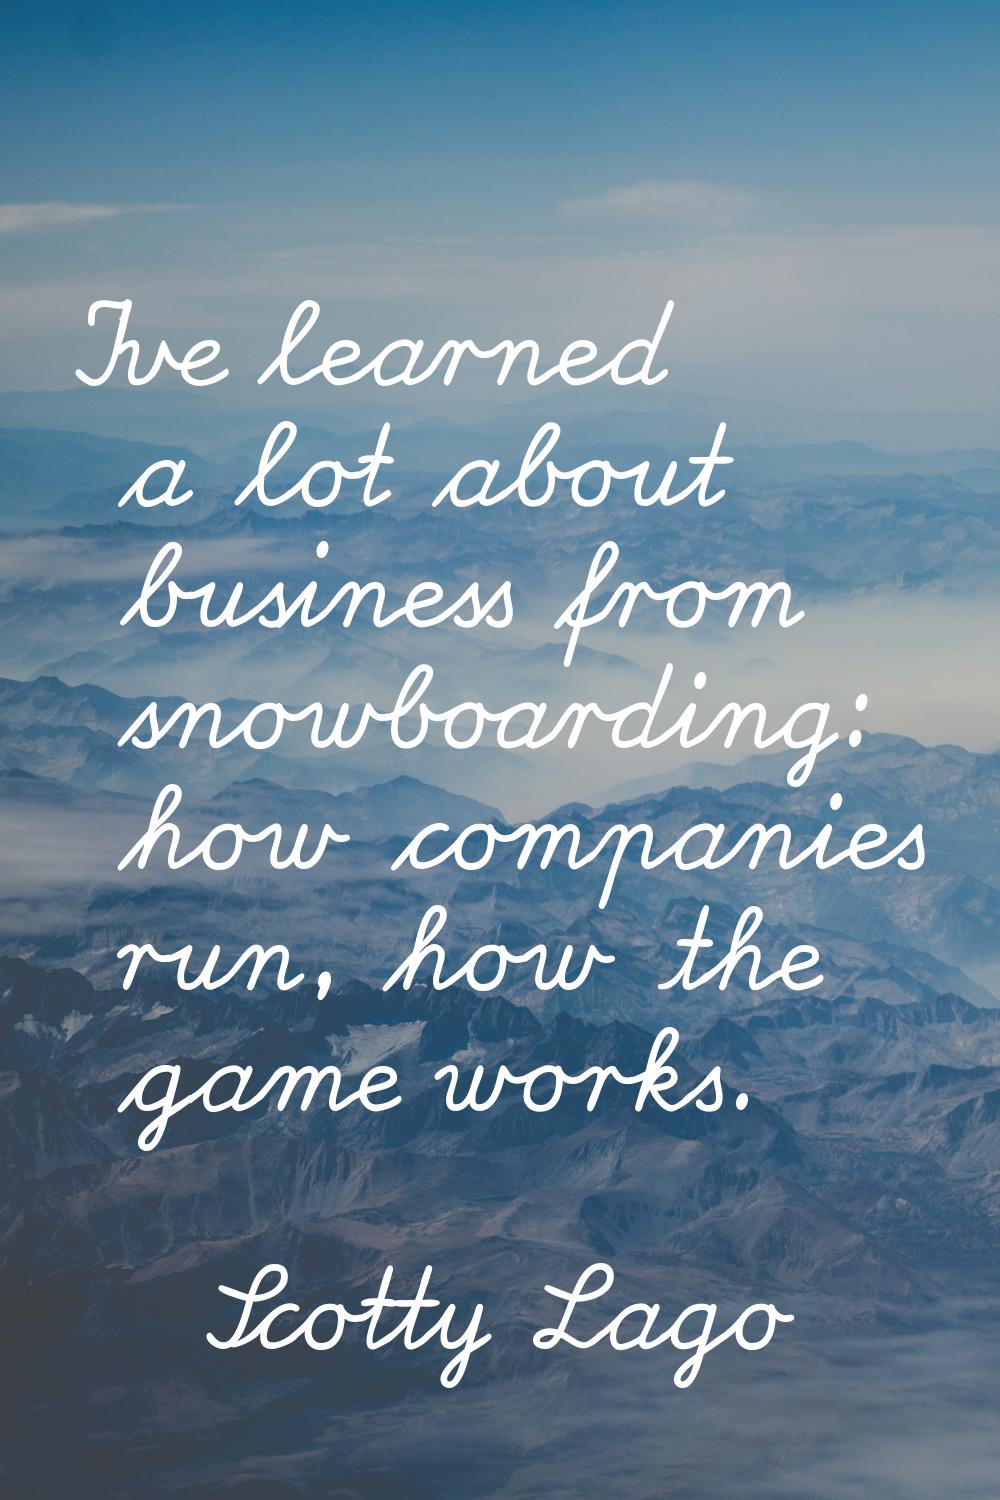 I've learned a lot about business from snowboarding: how companies run, how the game works.